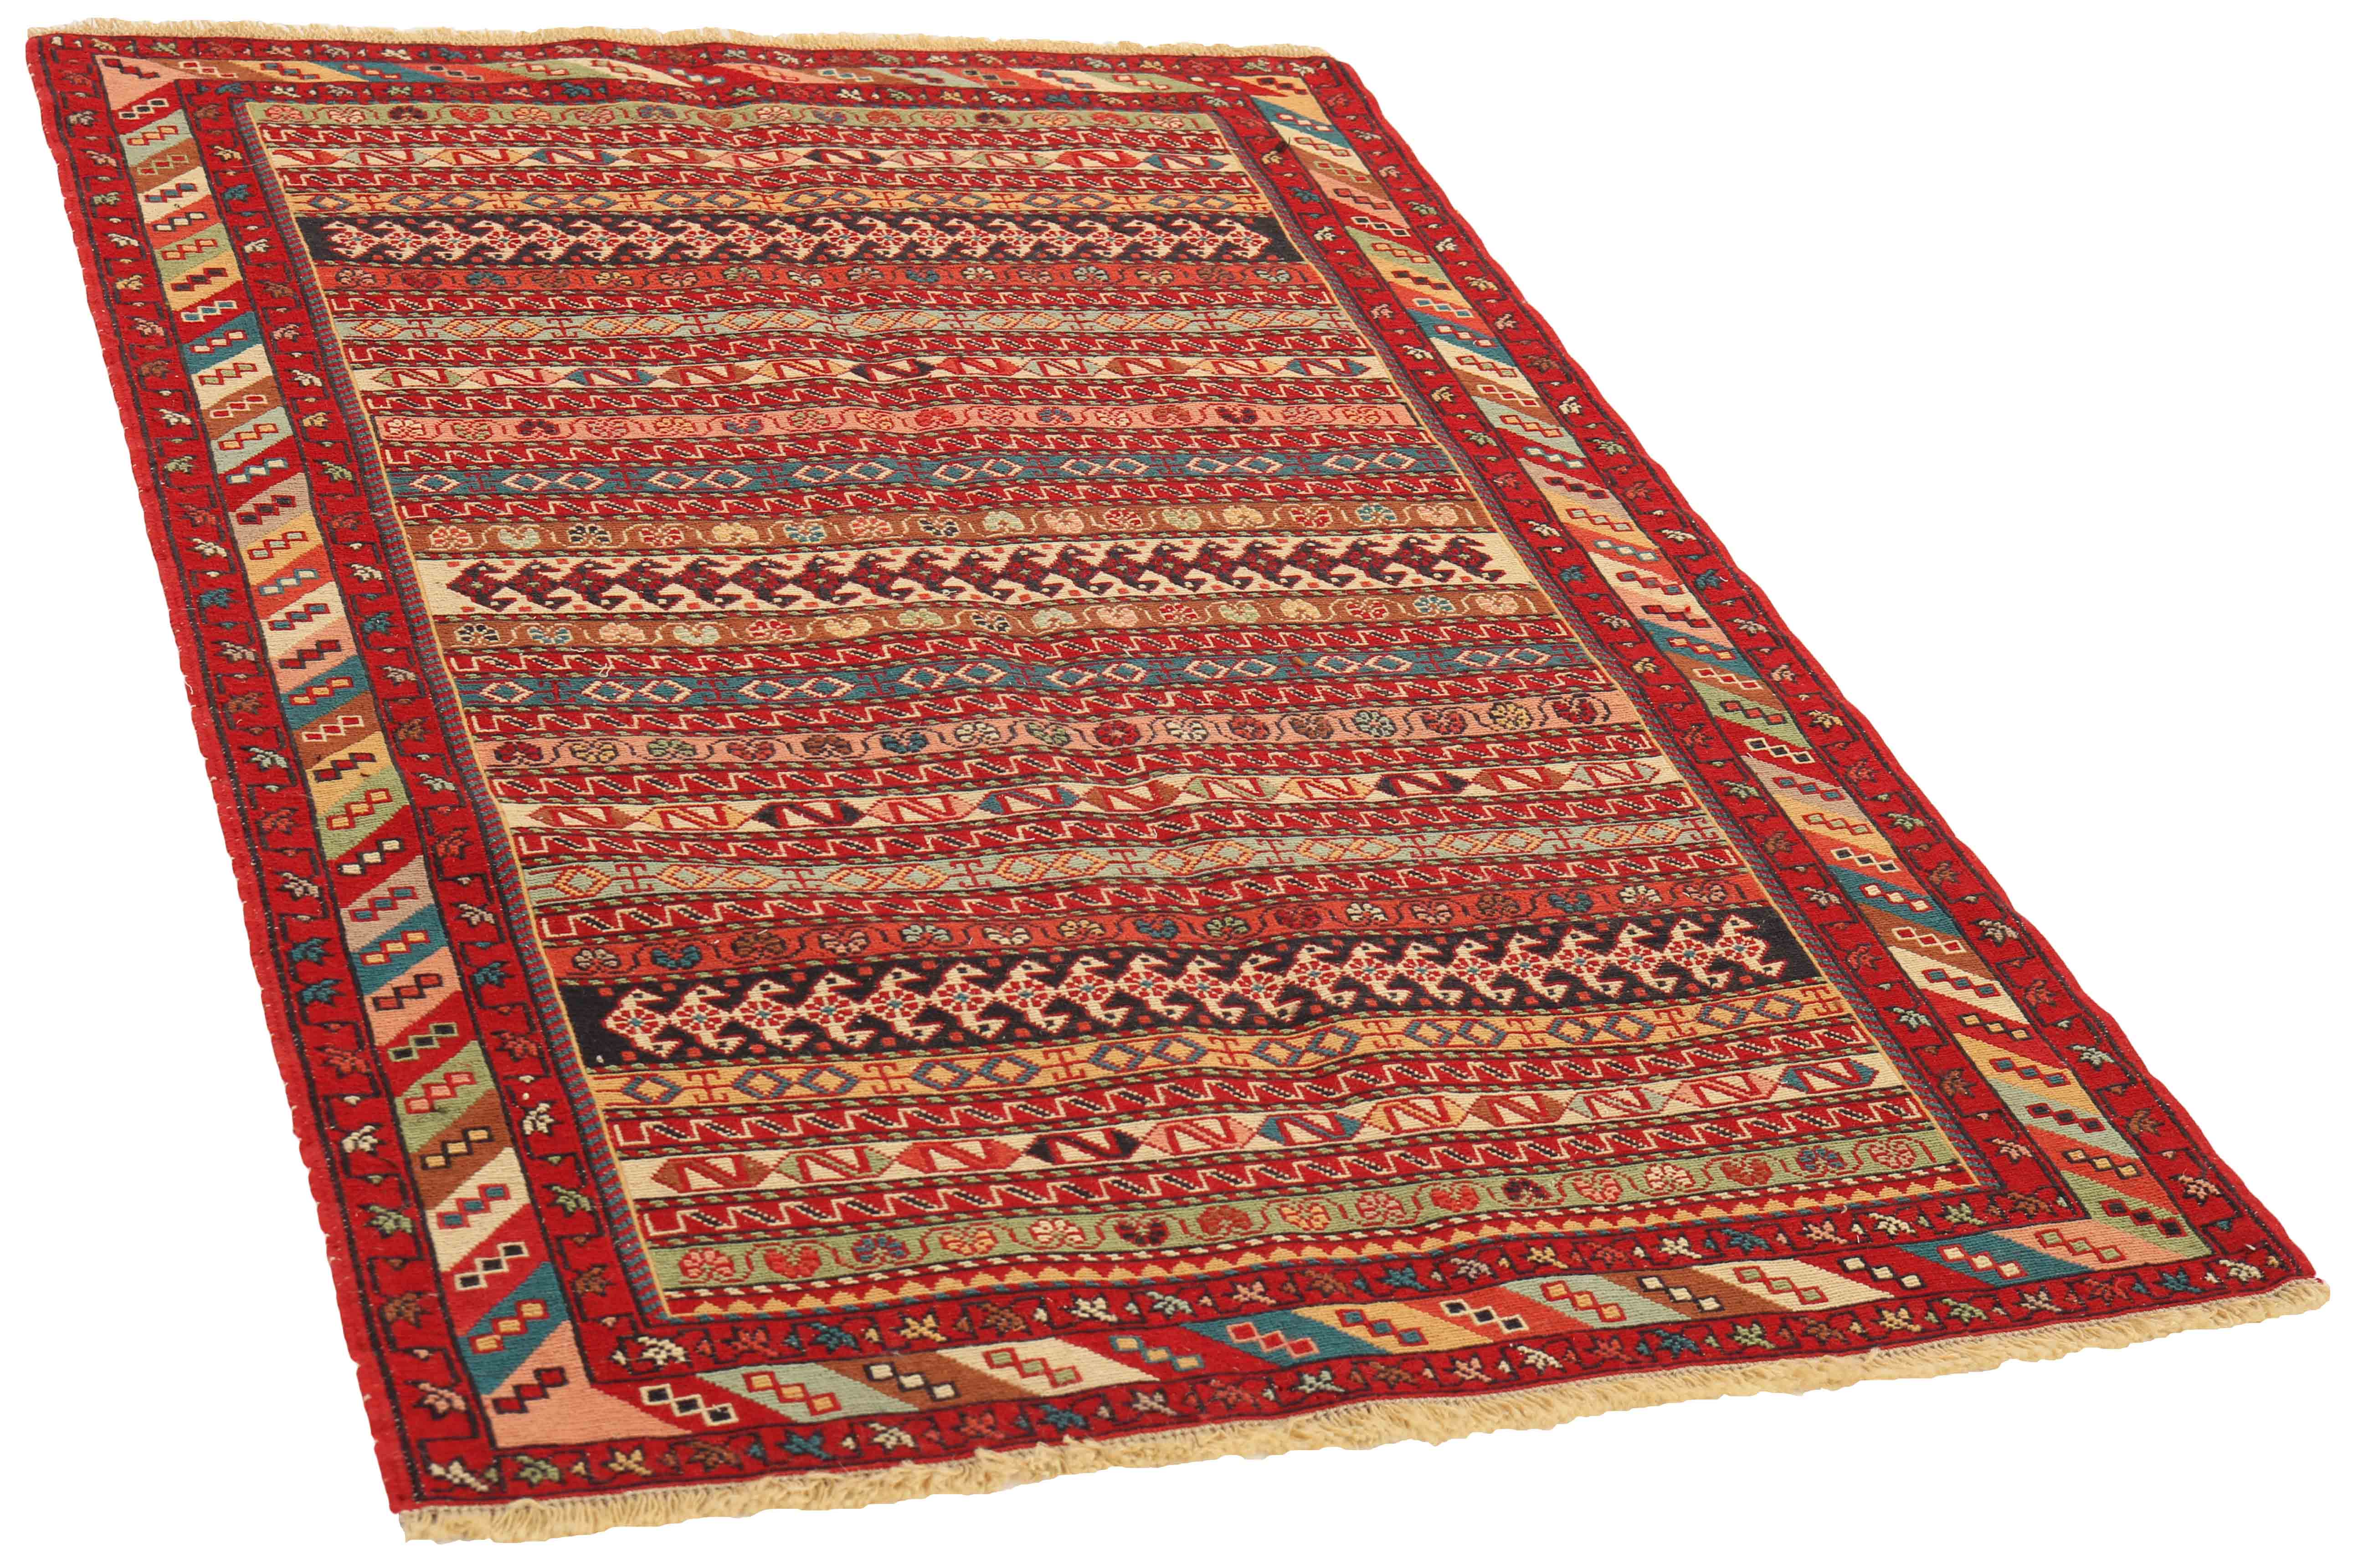 Bordered red Soumak rug with multicolour pattern
